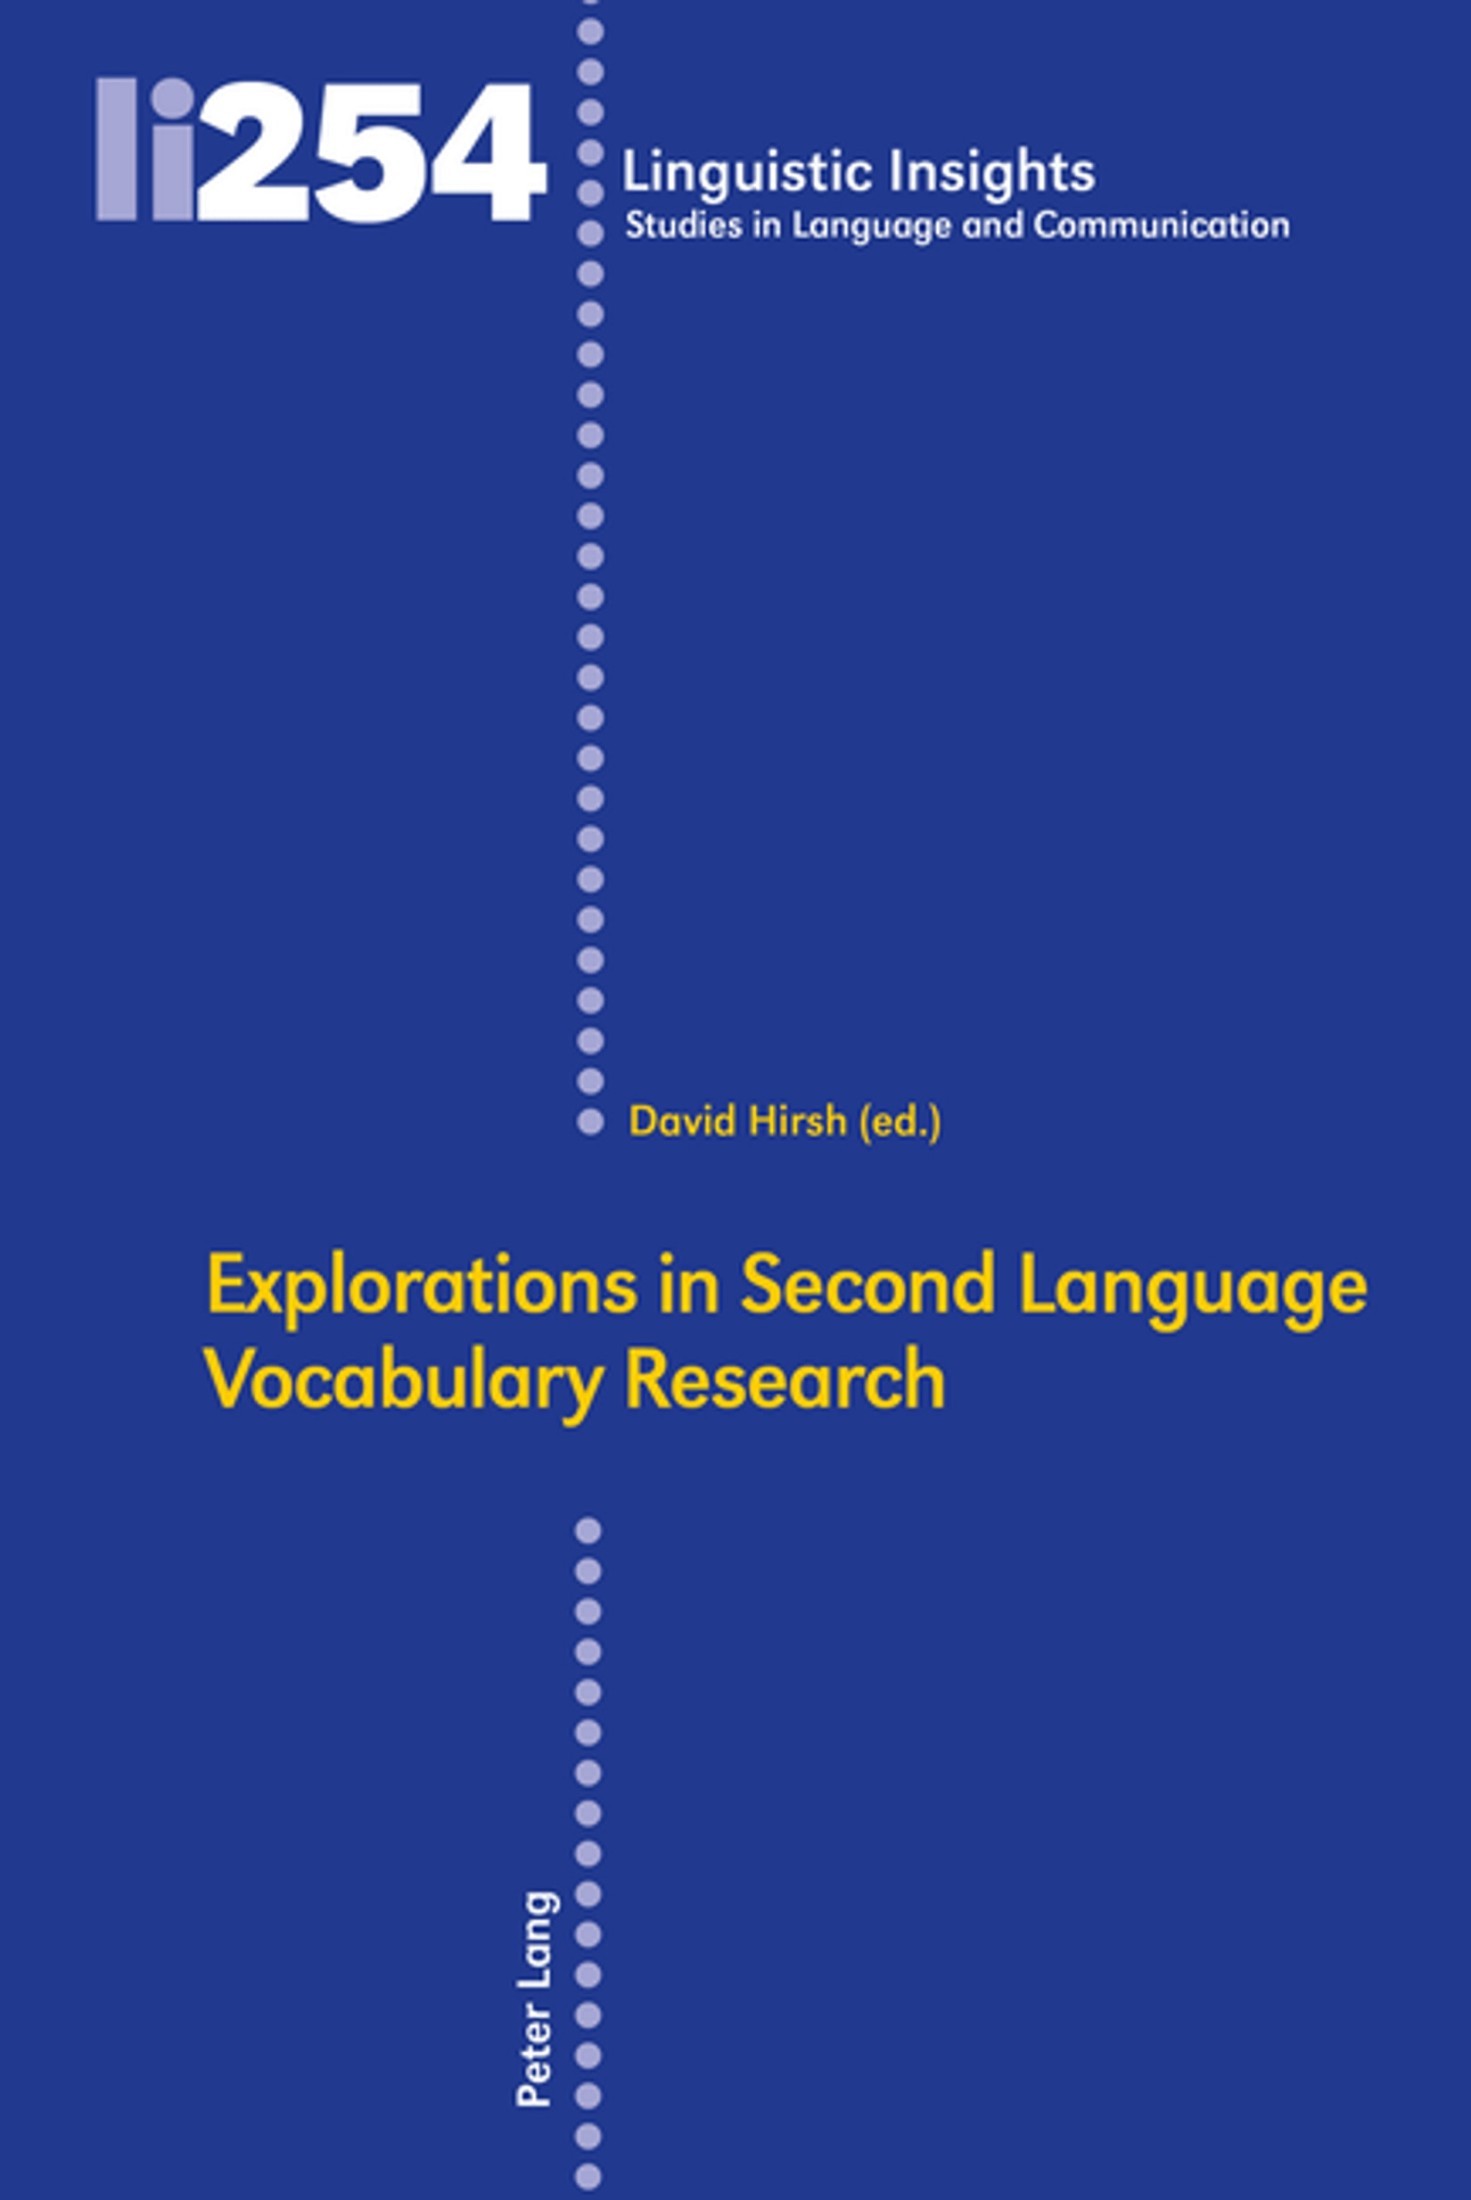 Current Perspectives in Second Language Vocabulary Research